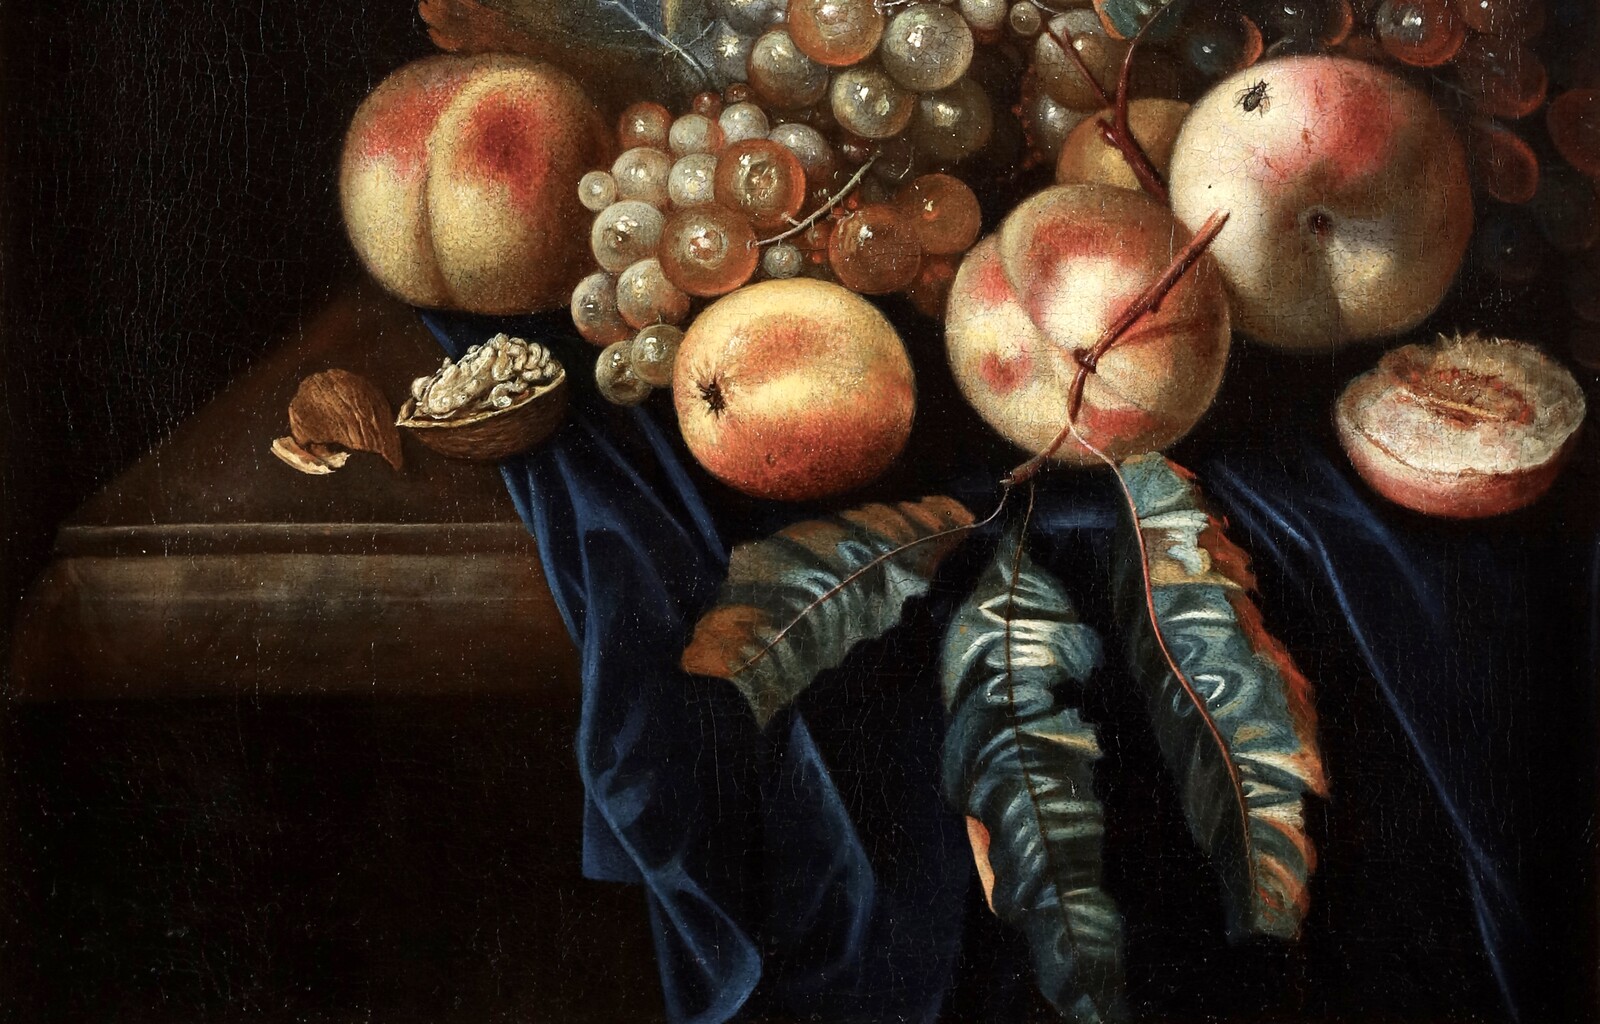 A fruit still life with peaches and grapes, a butterfly and a fly